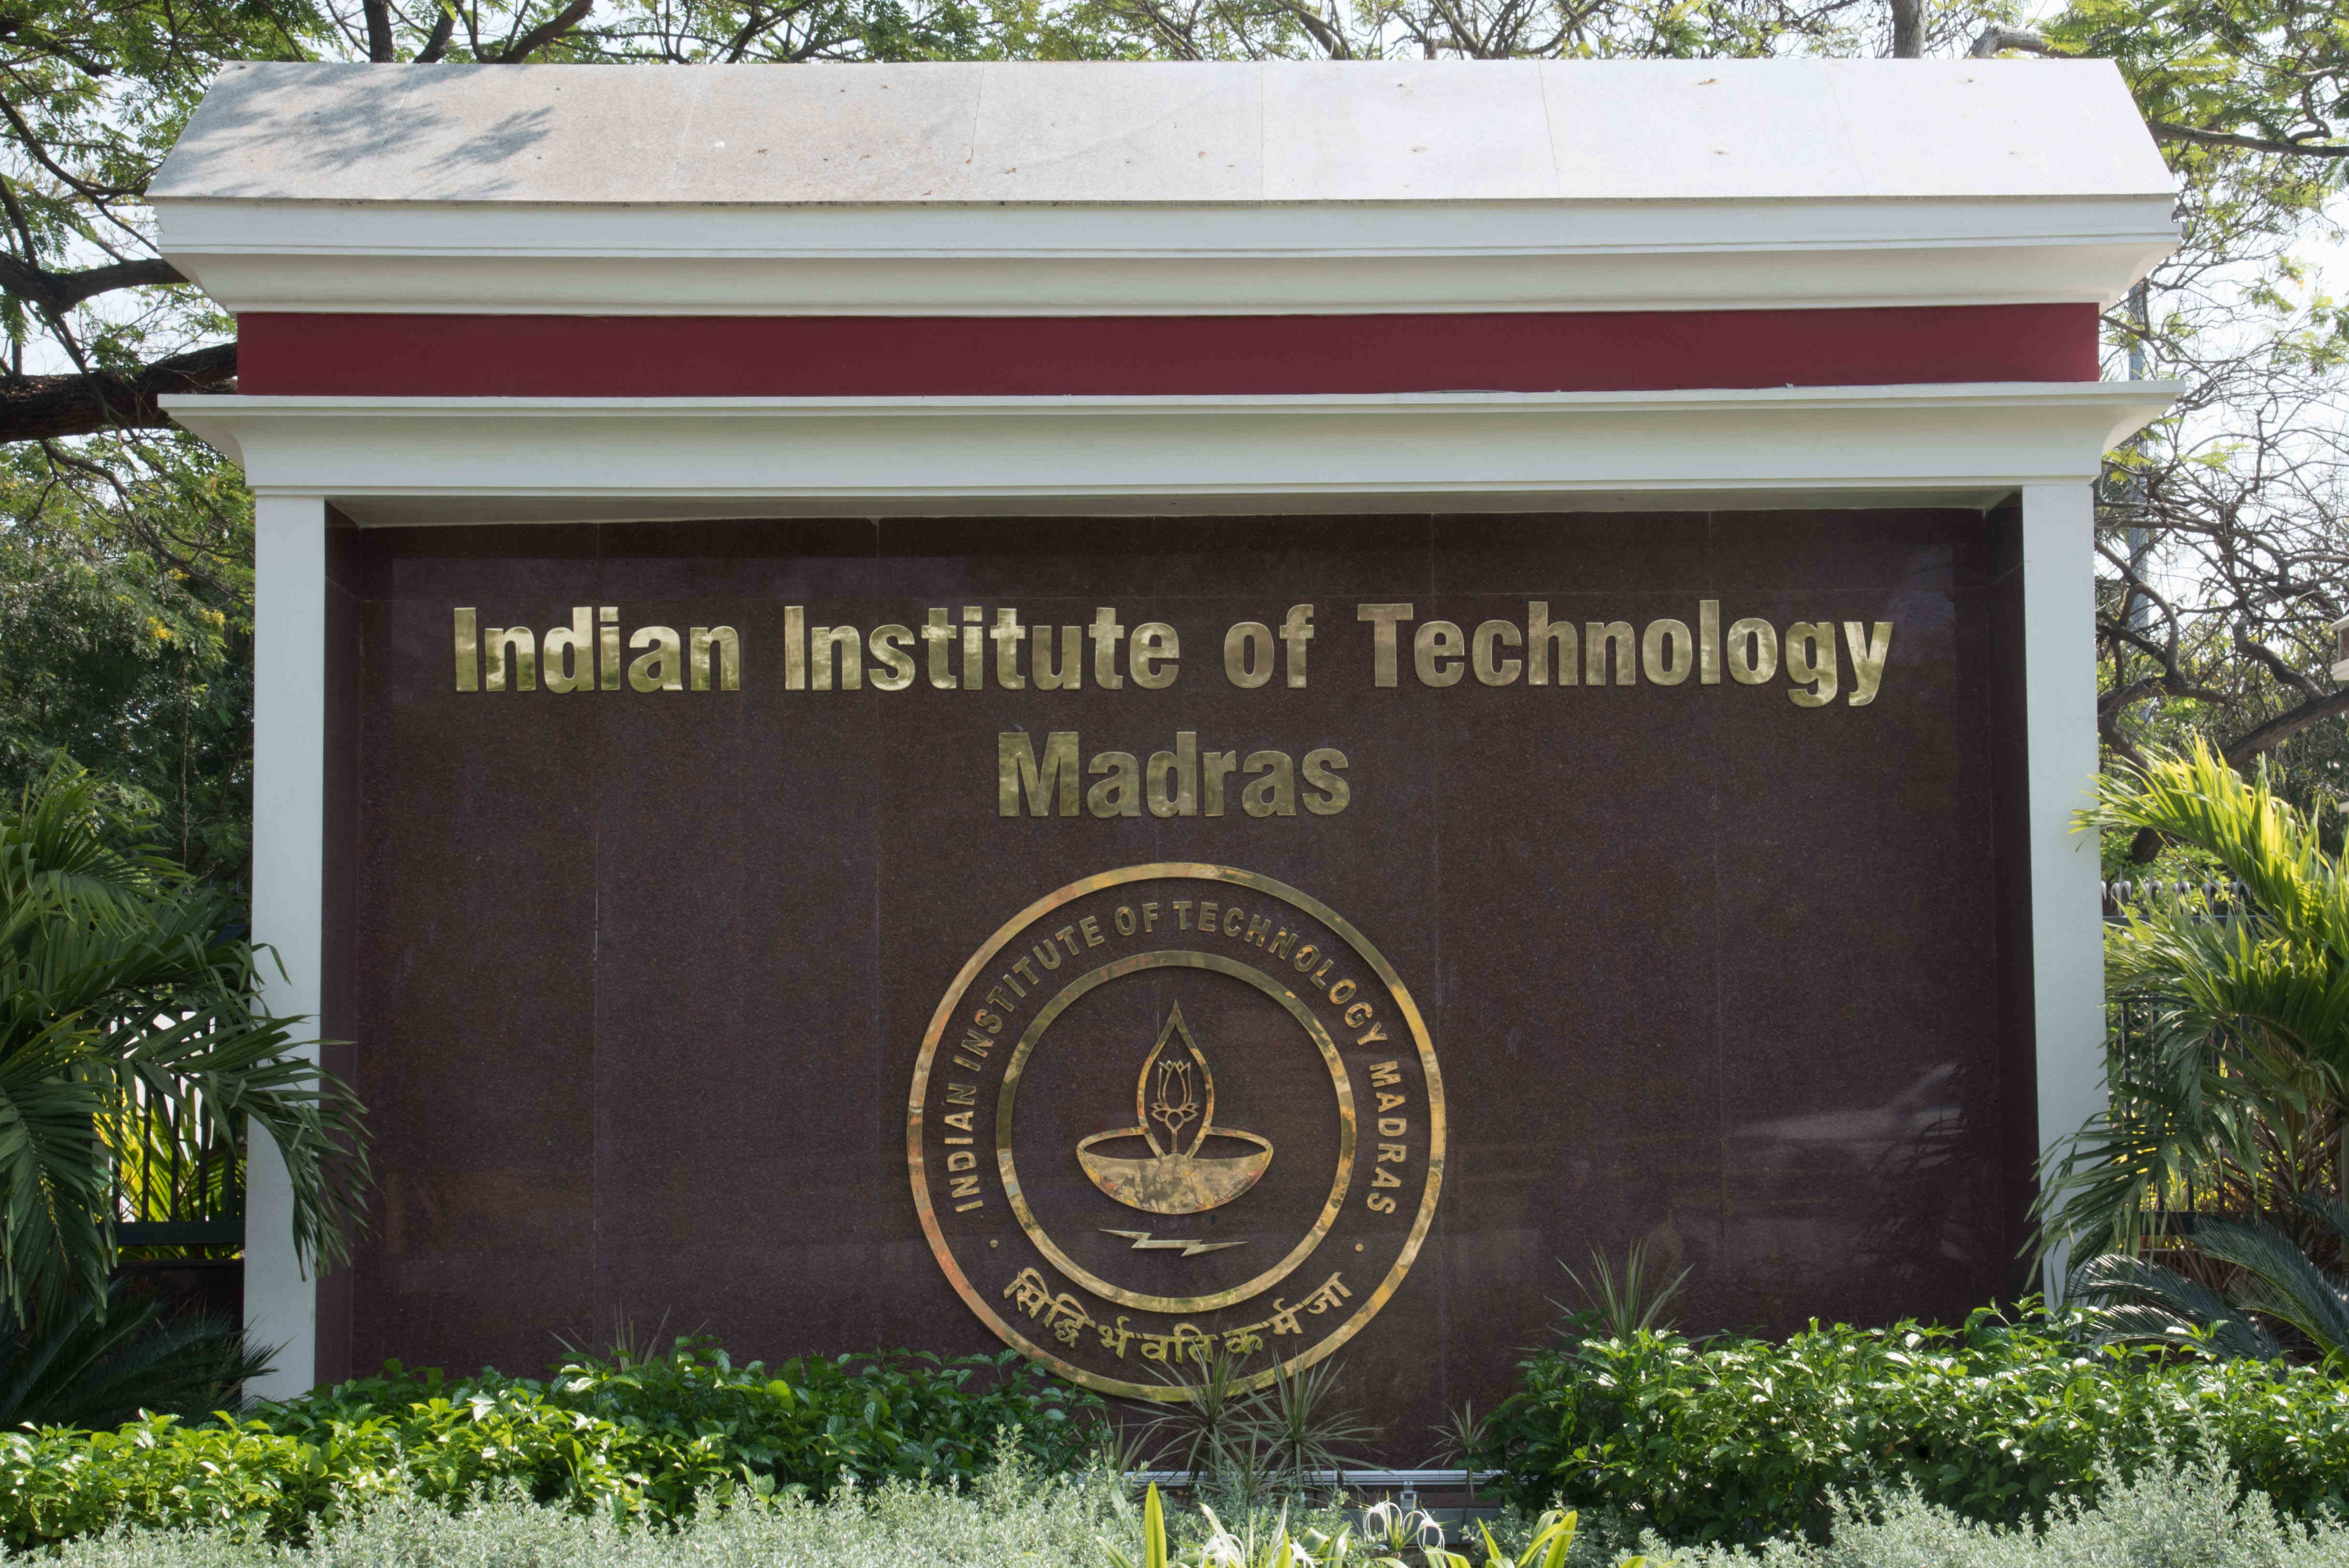 IIT Madras & THSTI Faridabad Researchers develop the first India specific AI model to determine the age of the foetus